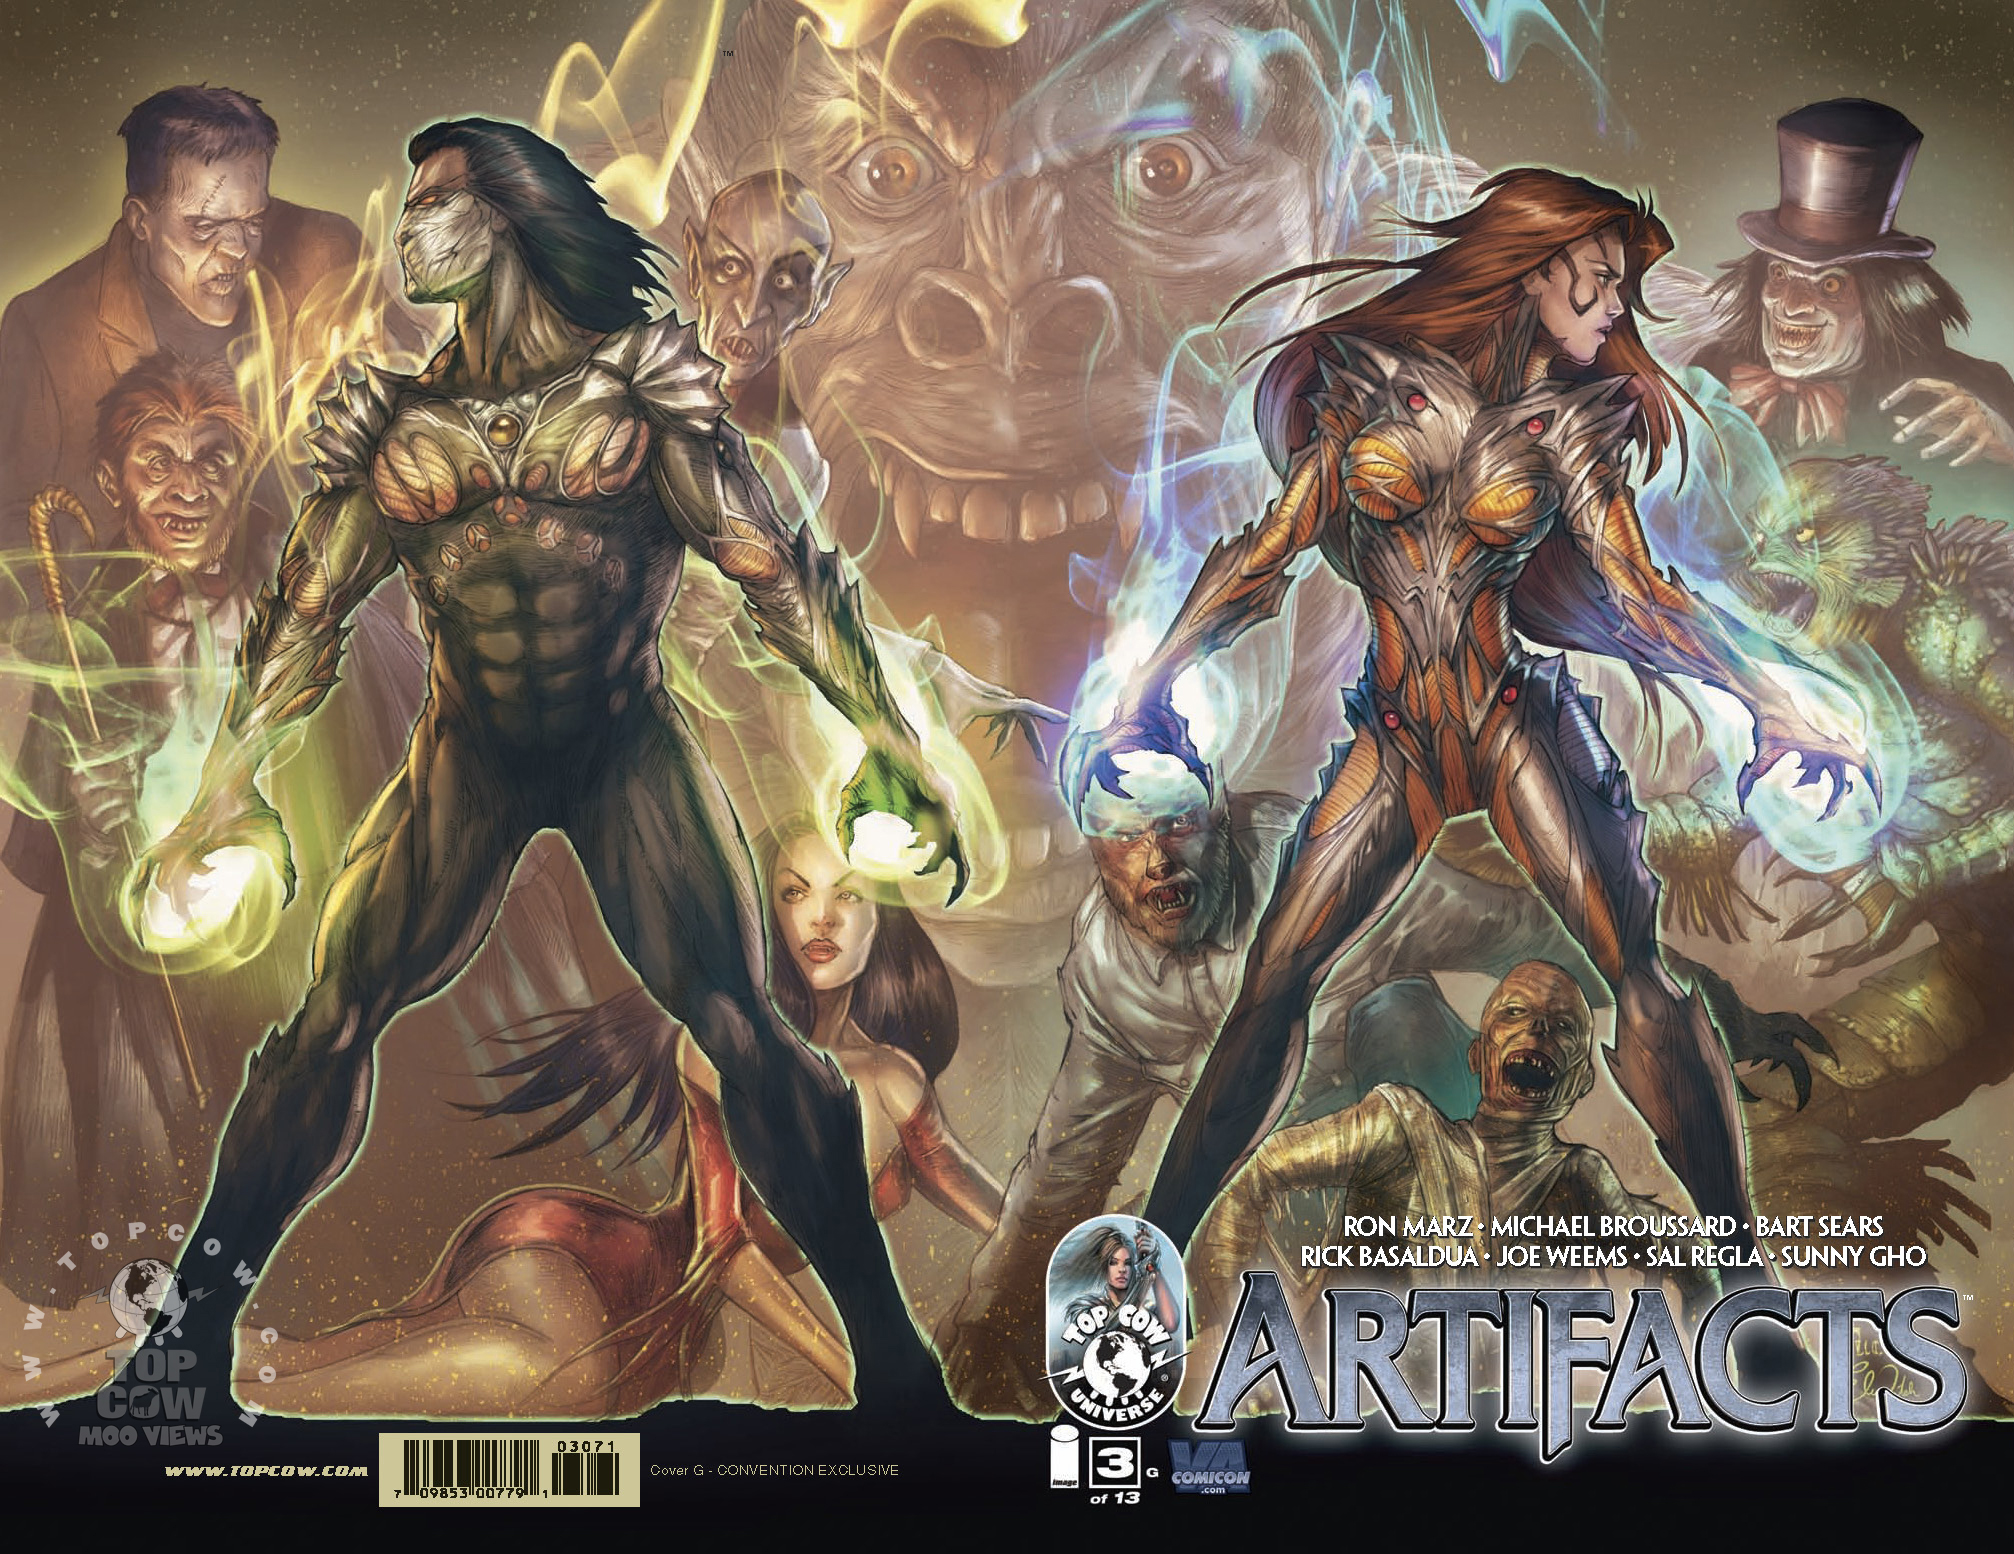 Artifacts Cover G #3